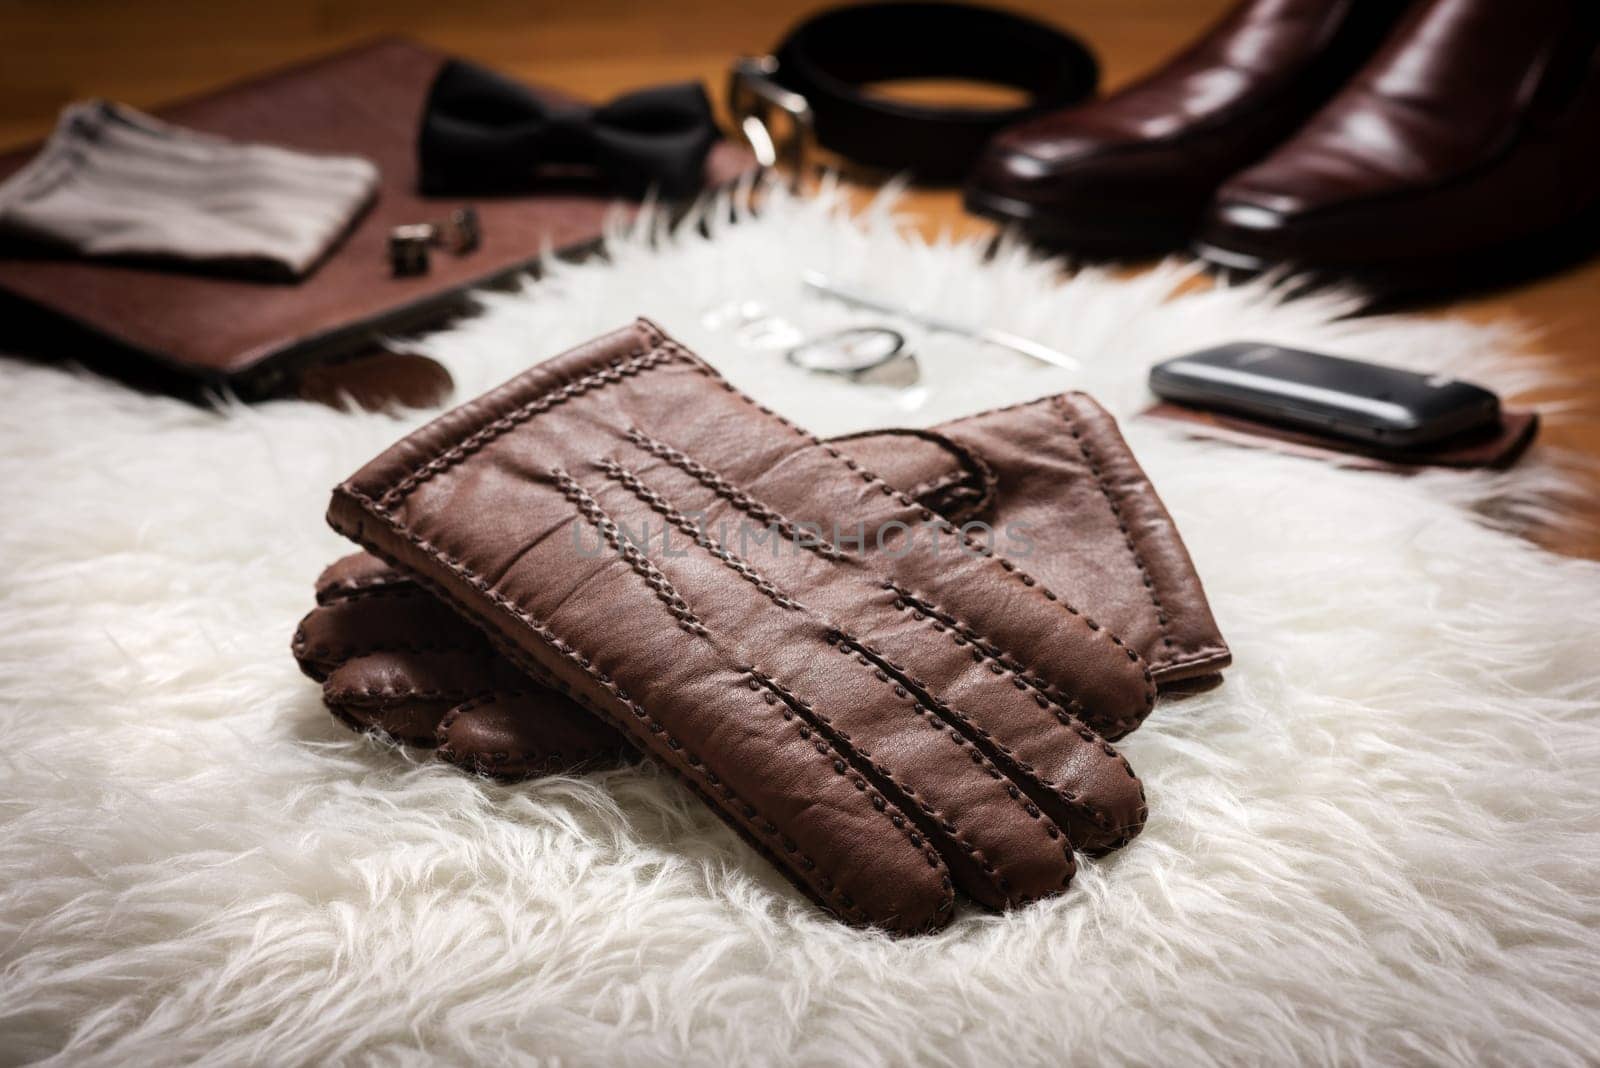 Pair of men's brown leather gloves and other men's accessories over white fur.